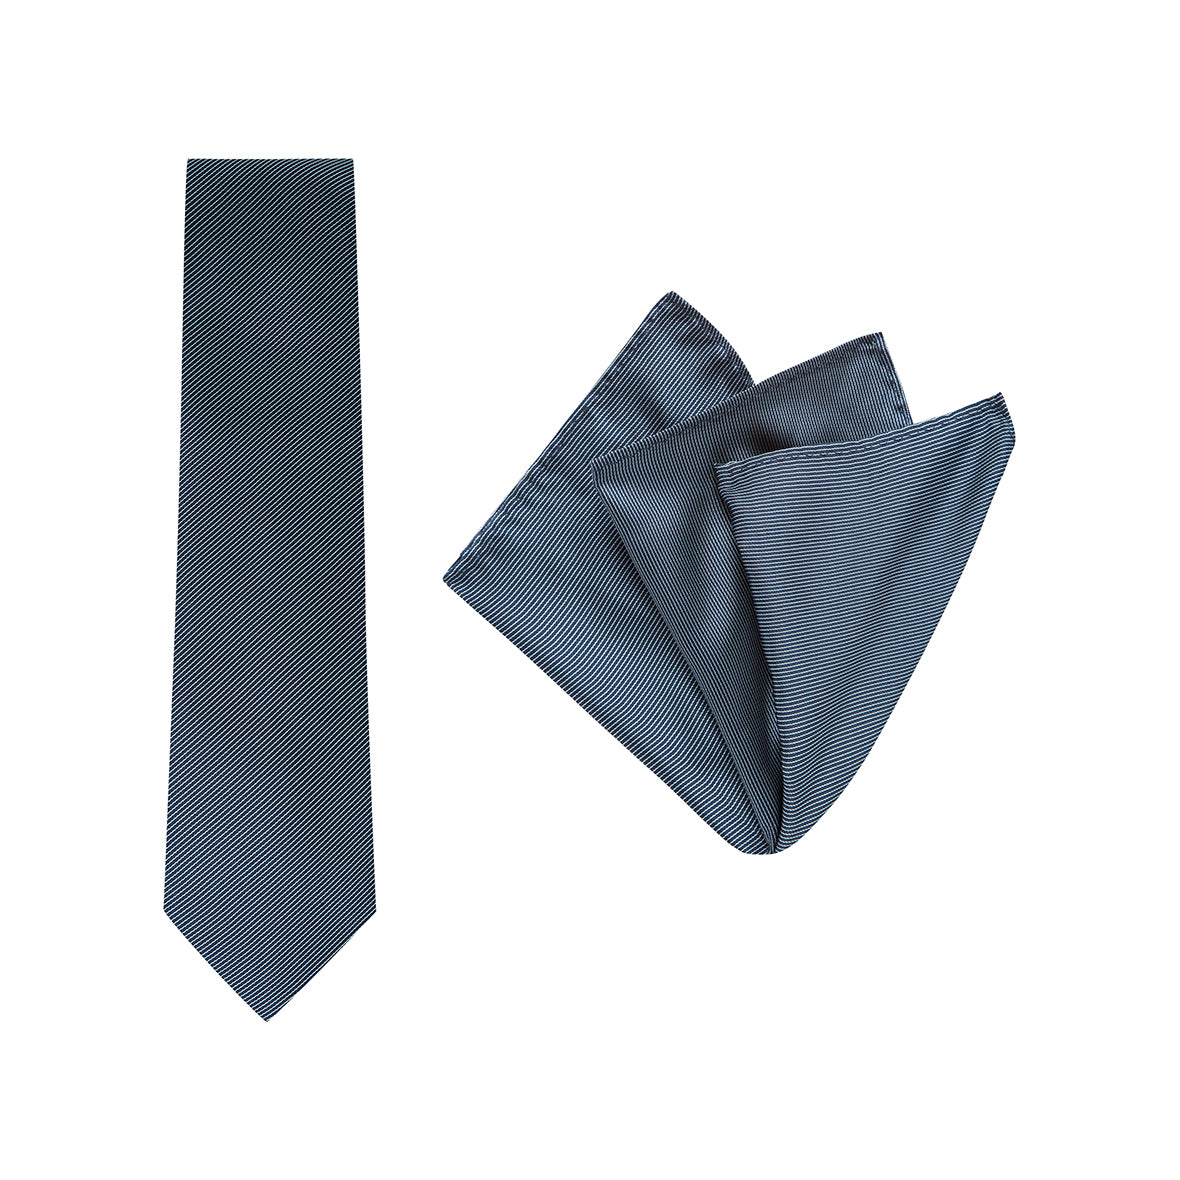 TIE + POCKET SQUARE SET. Pinstripe. Navy. Supplied with matching pocket square.-Ties-PEROZ Accessories